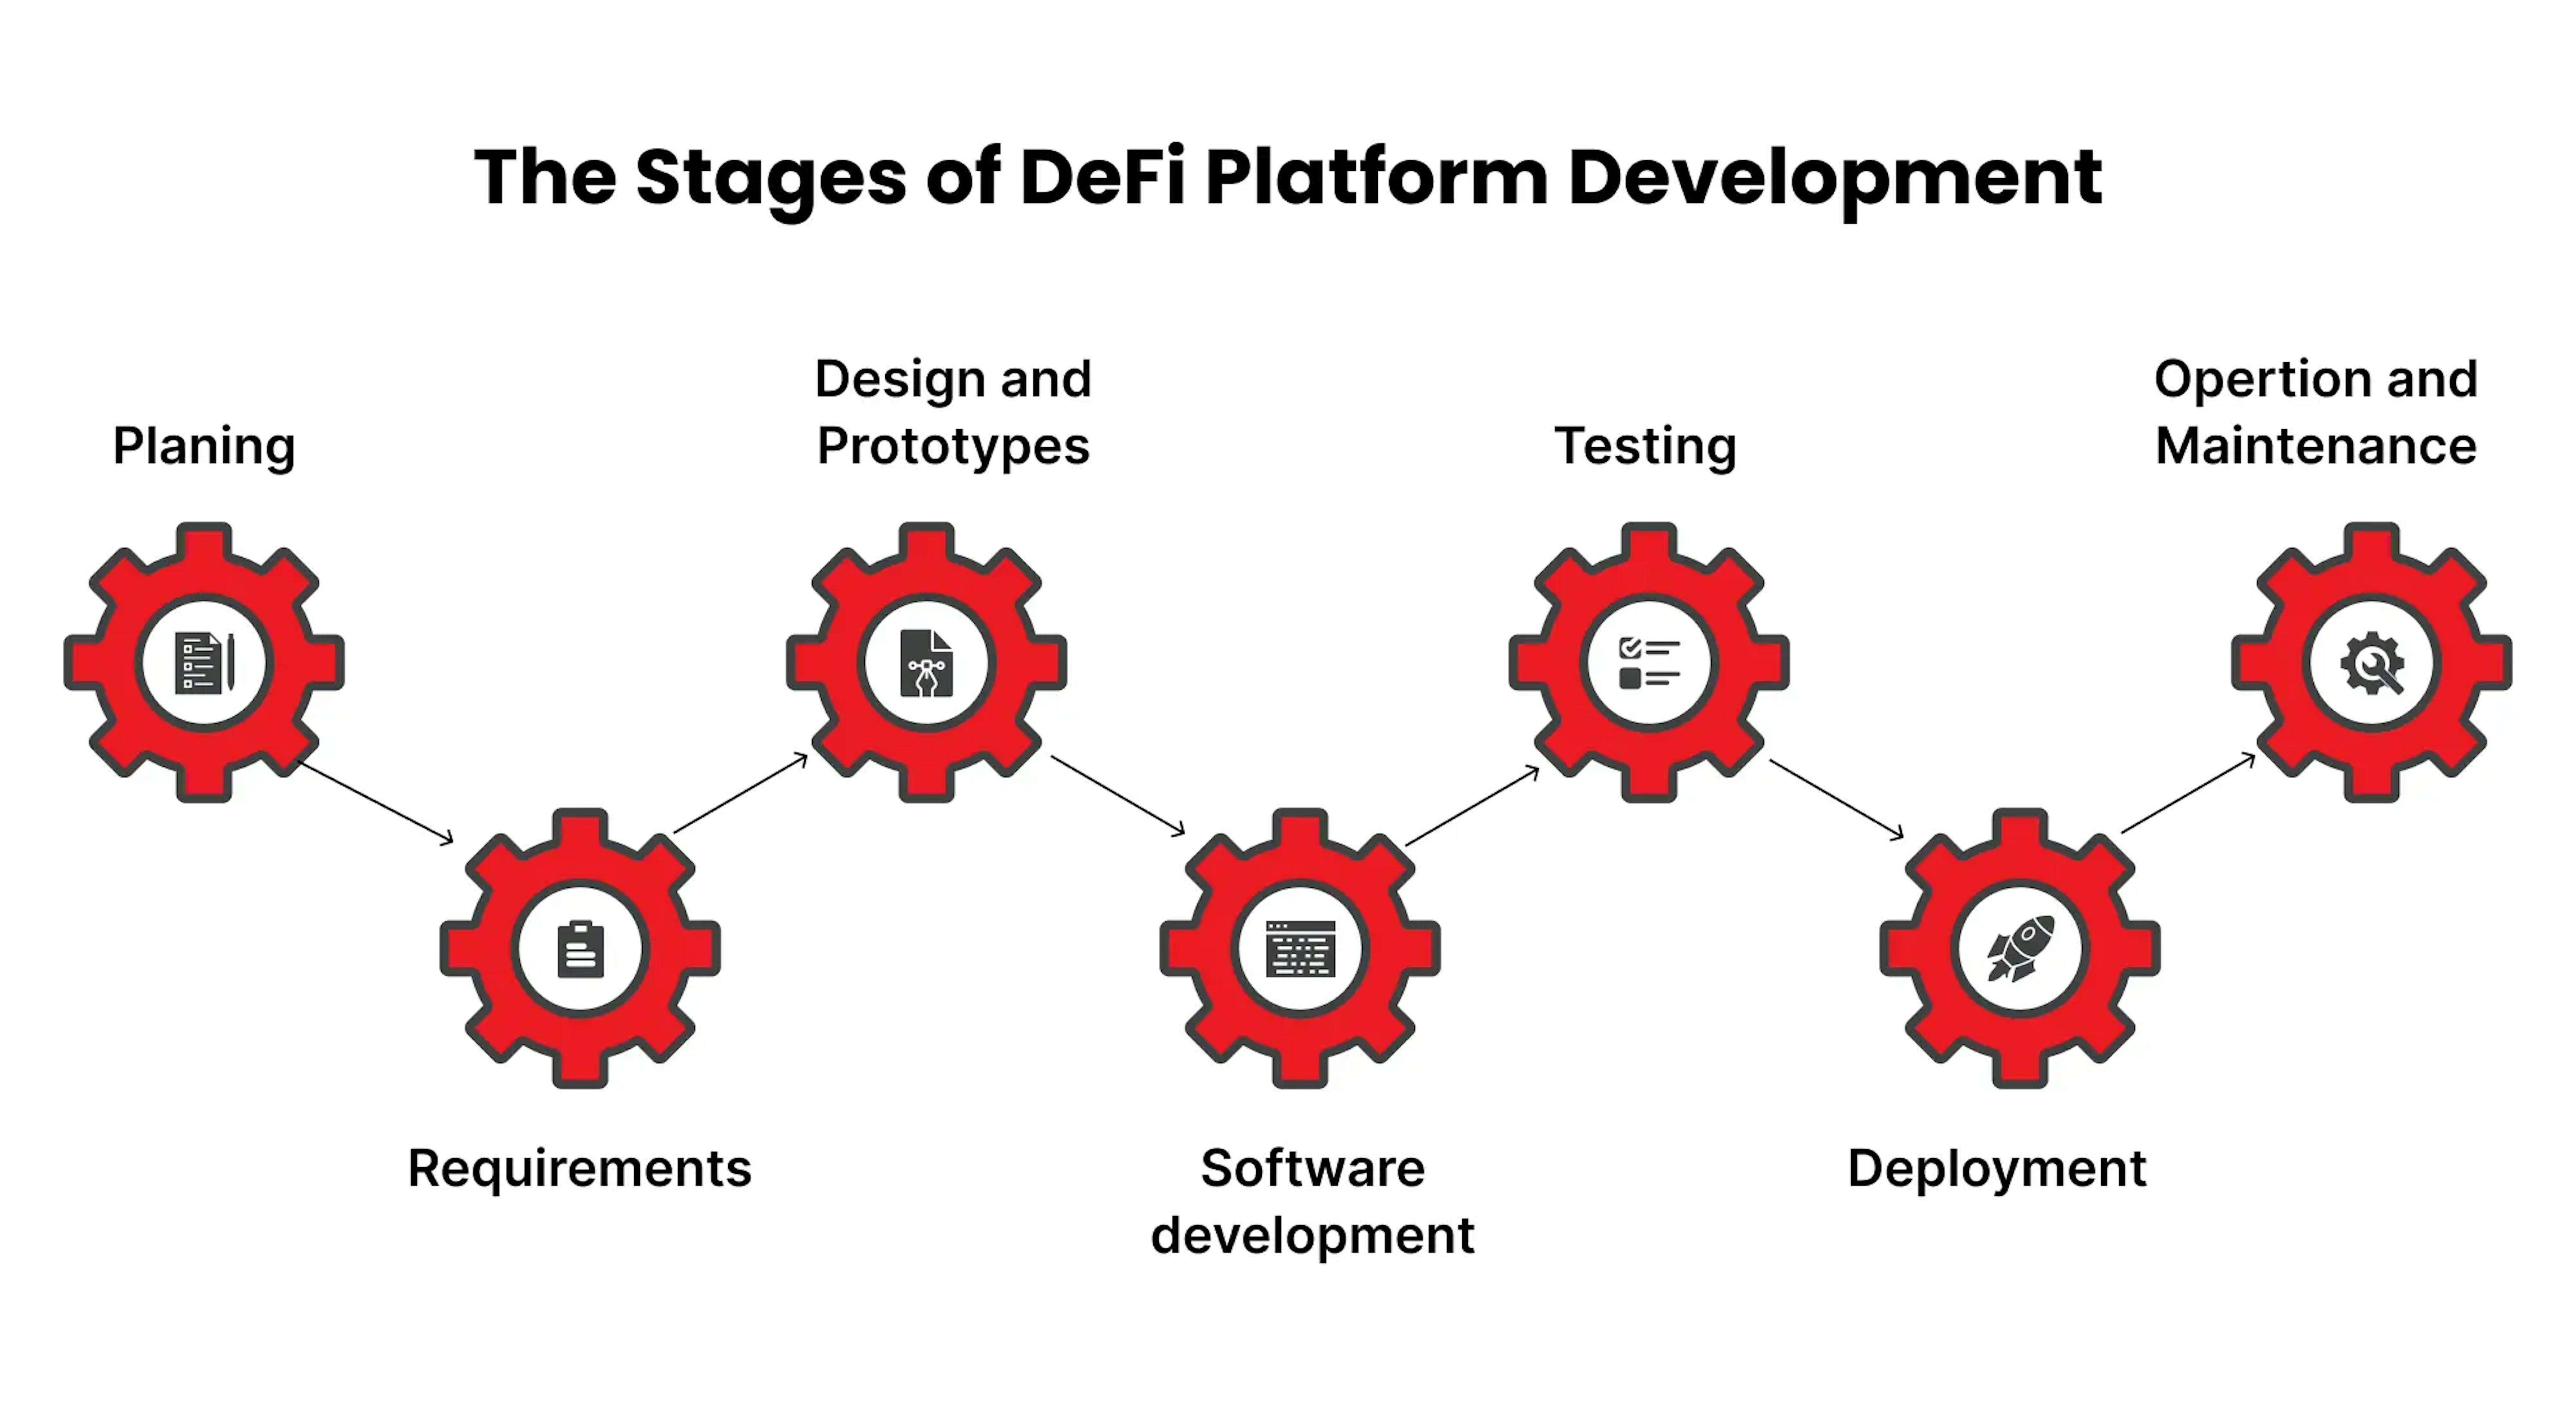 How to build your own DeFi platform?